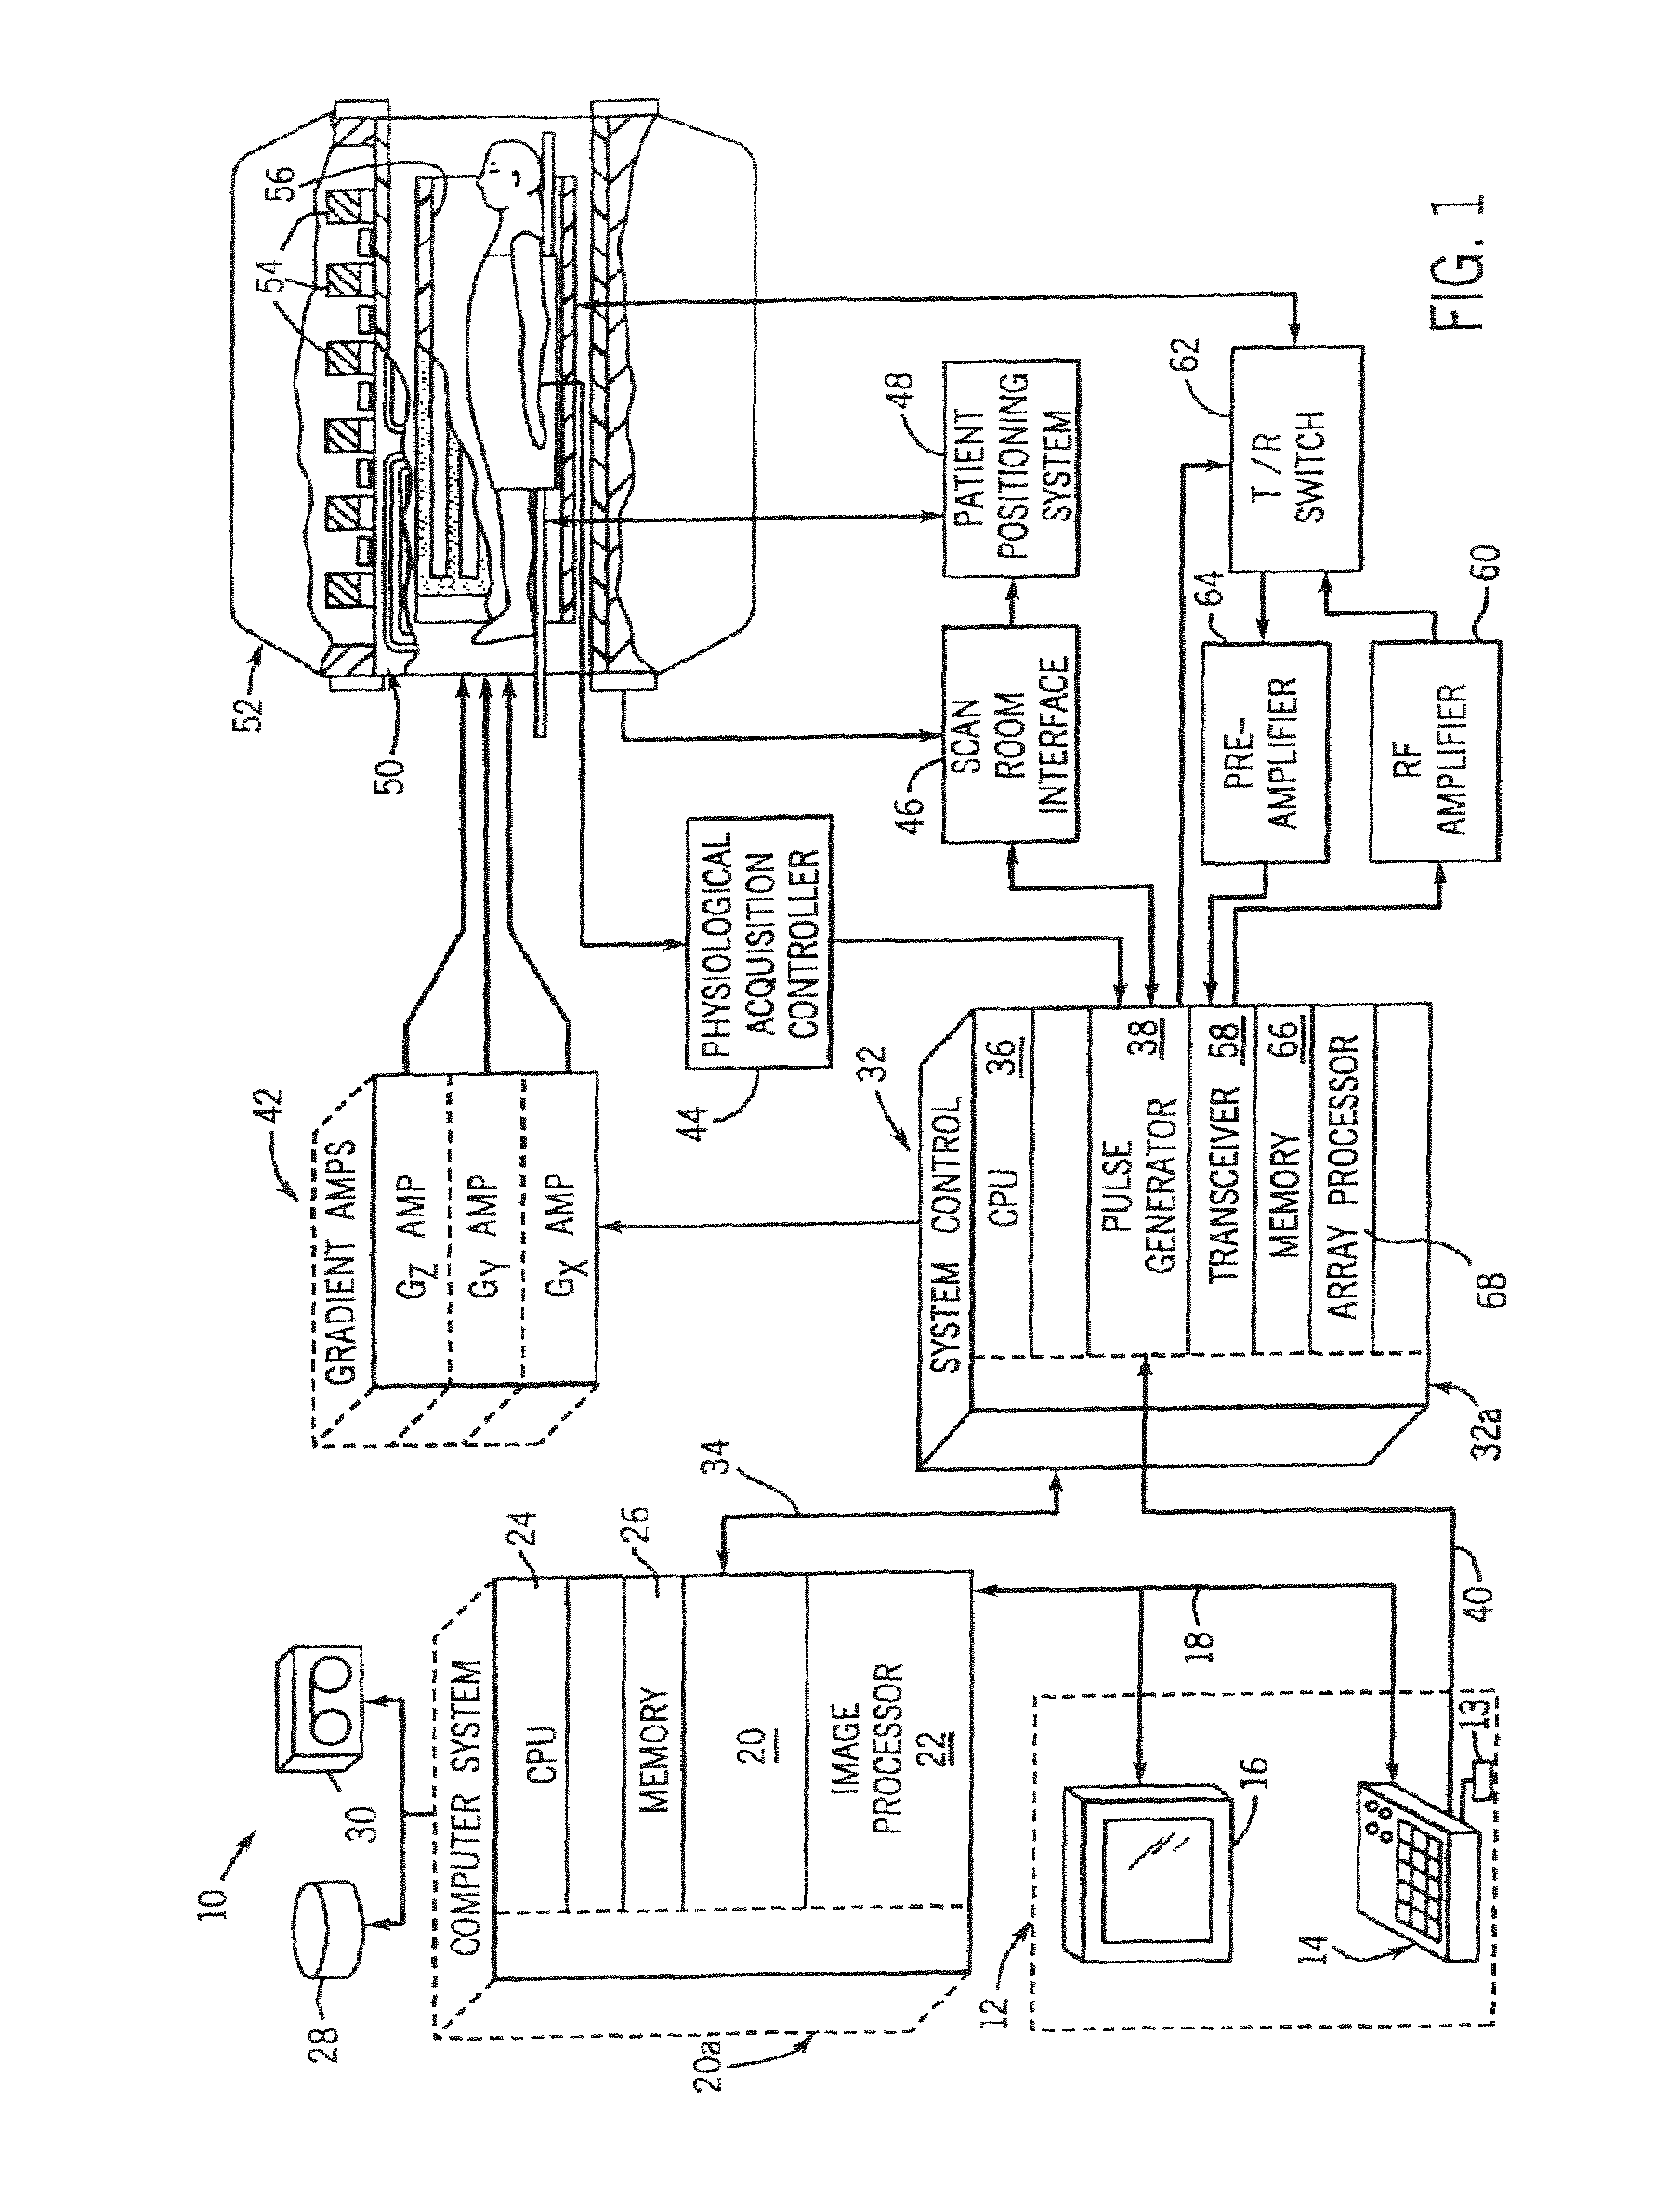 6-channel array coil for magnetic resonance imaging